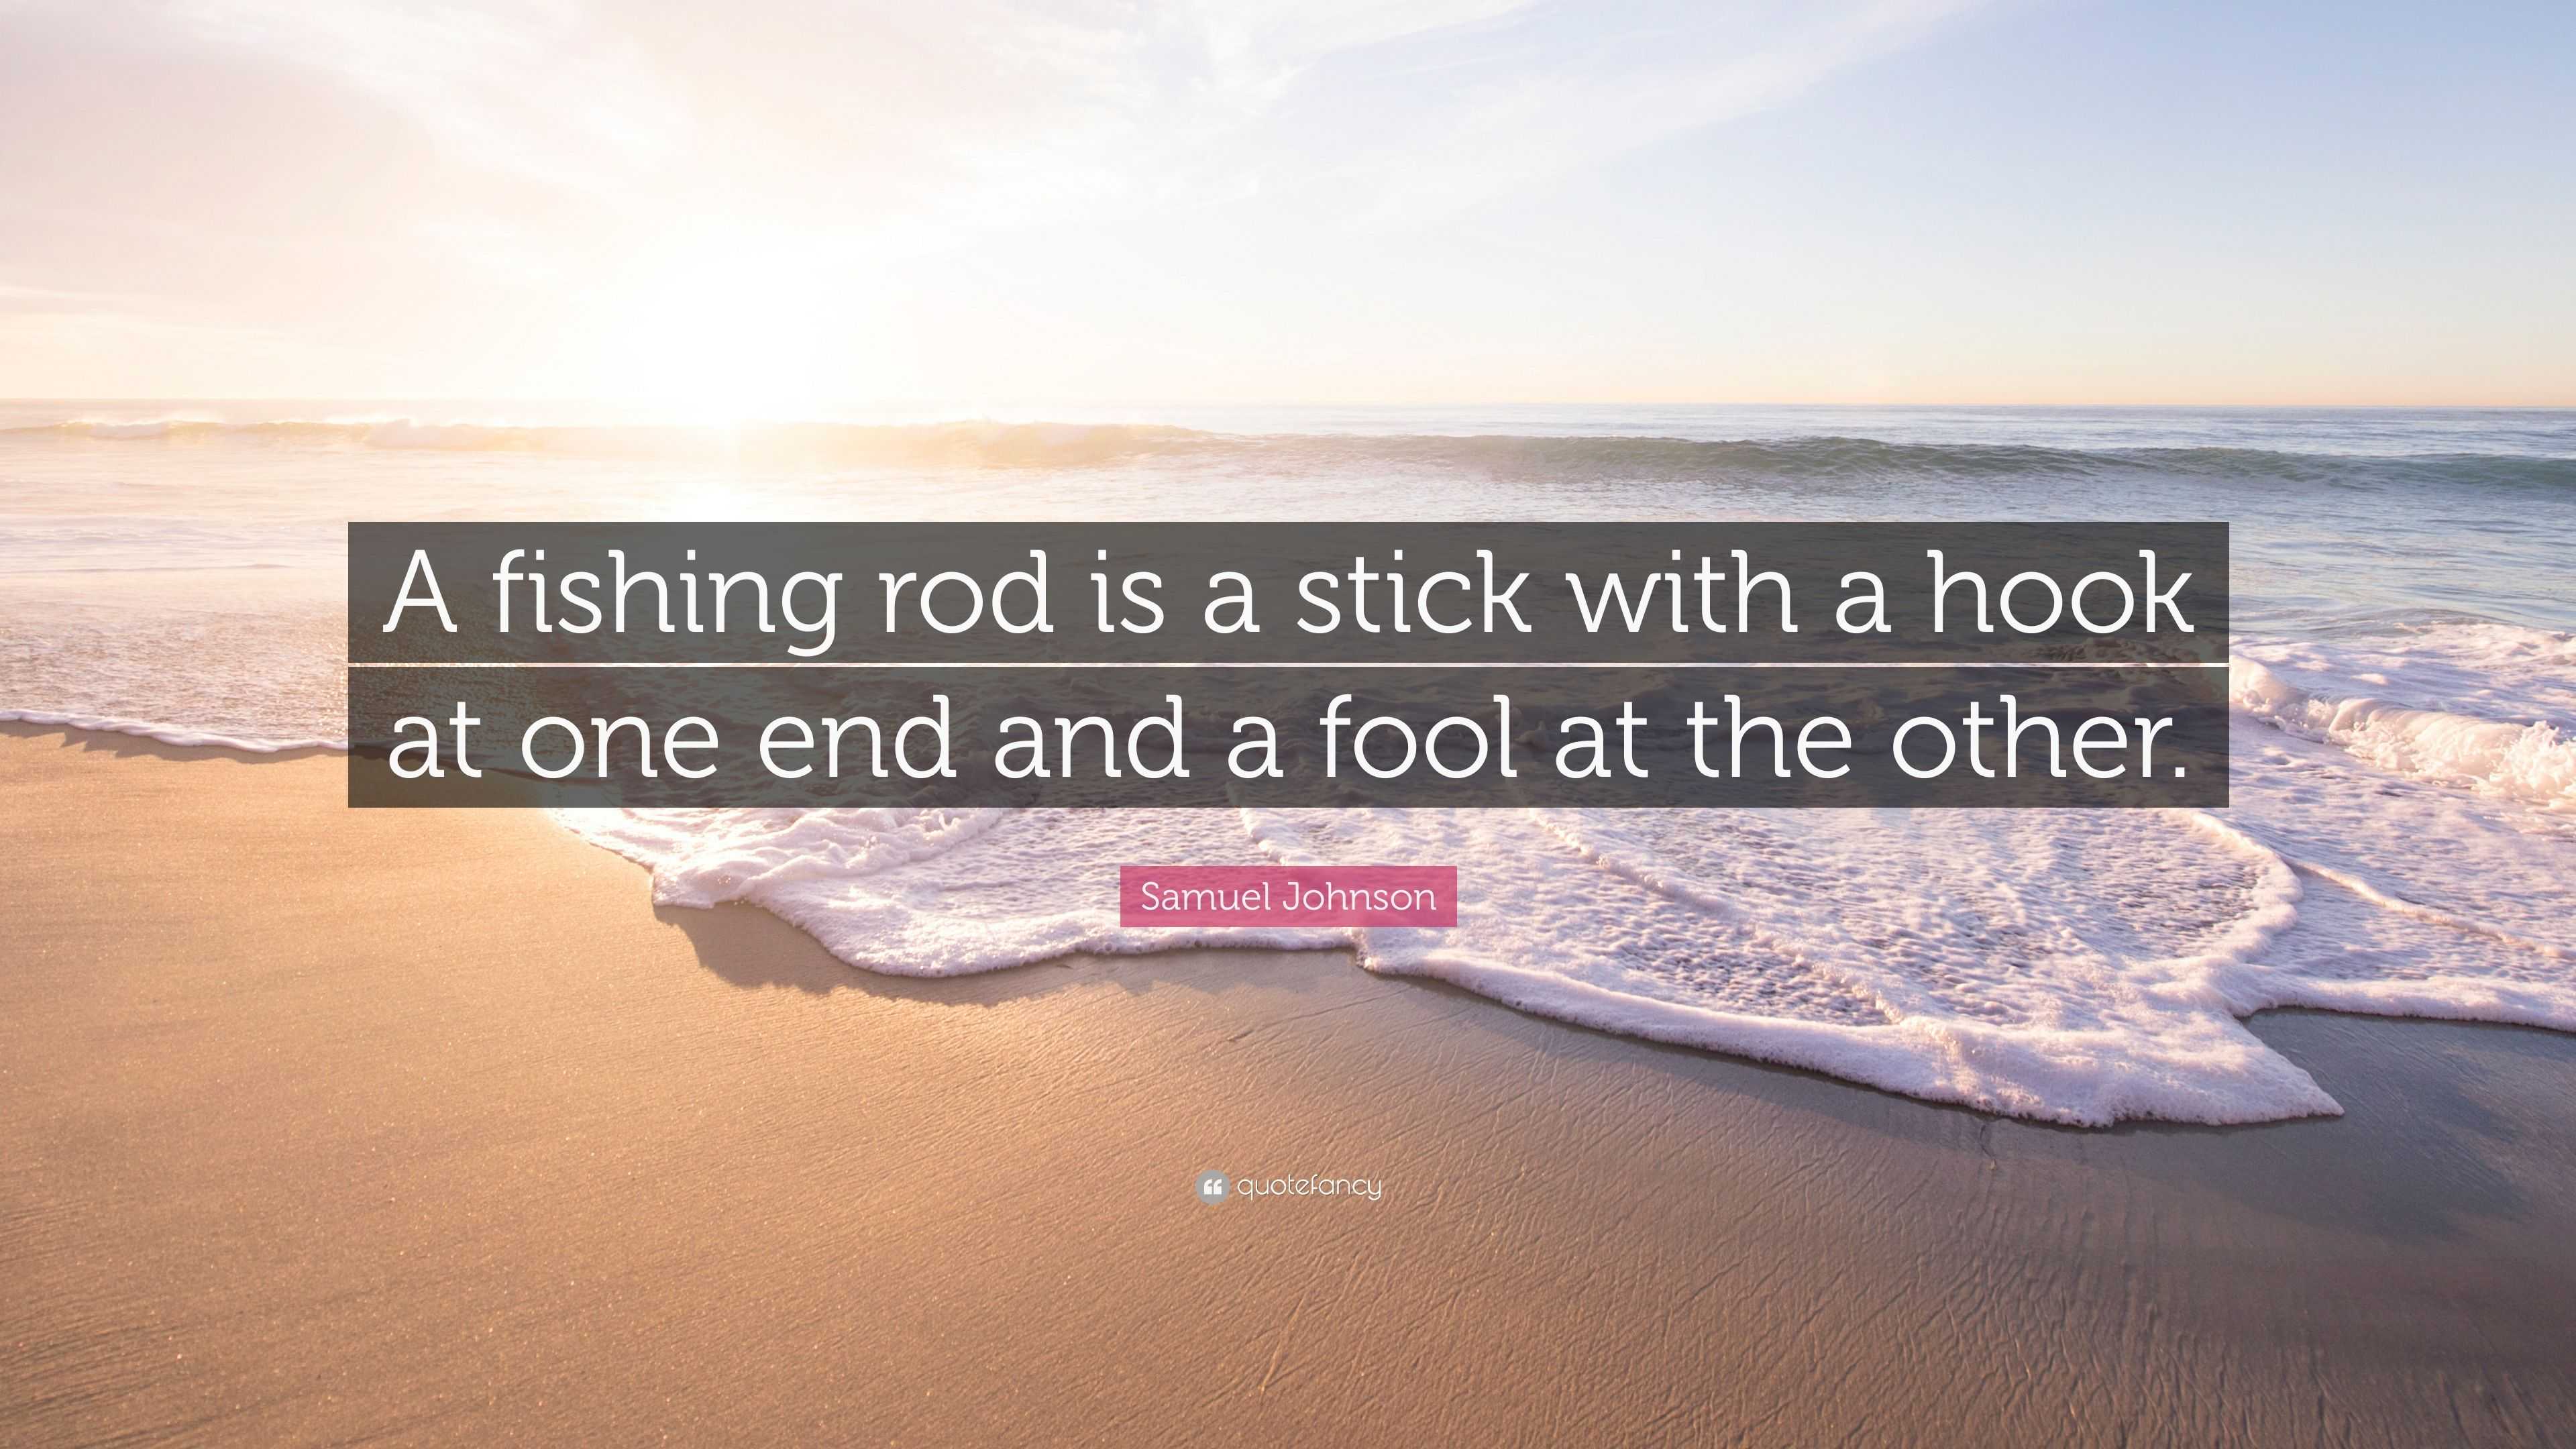 Samuel Johnson Quote: “A fishing rod is a stick with a hook at one end and